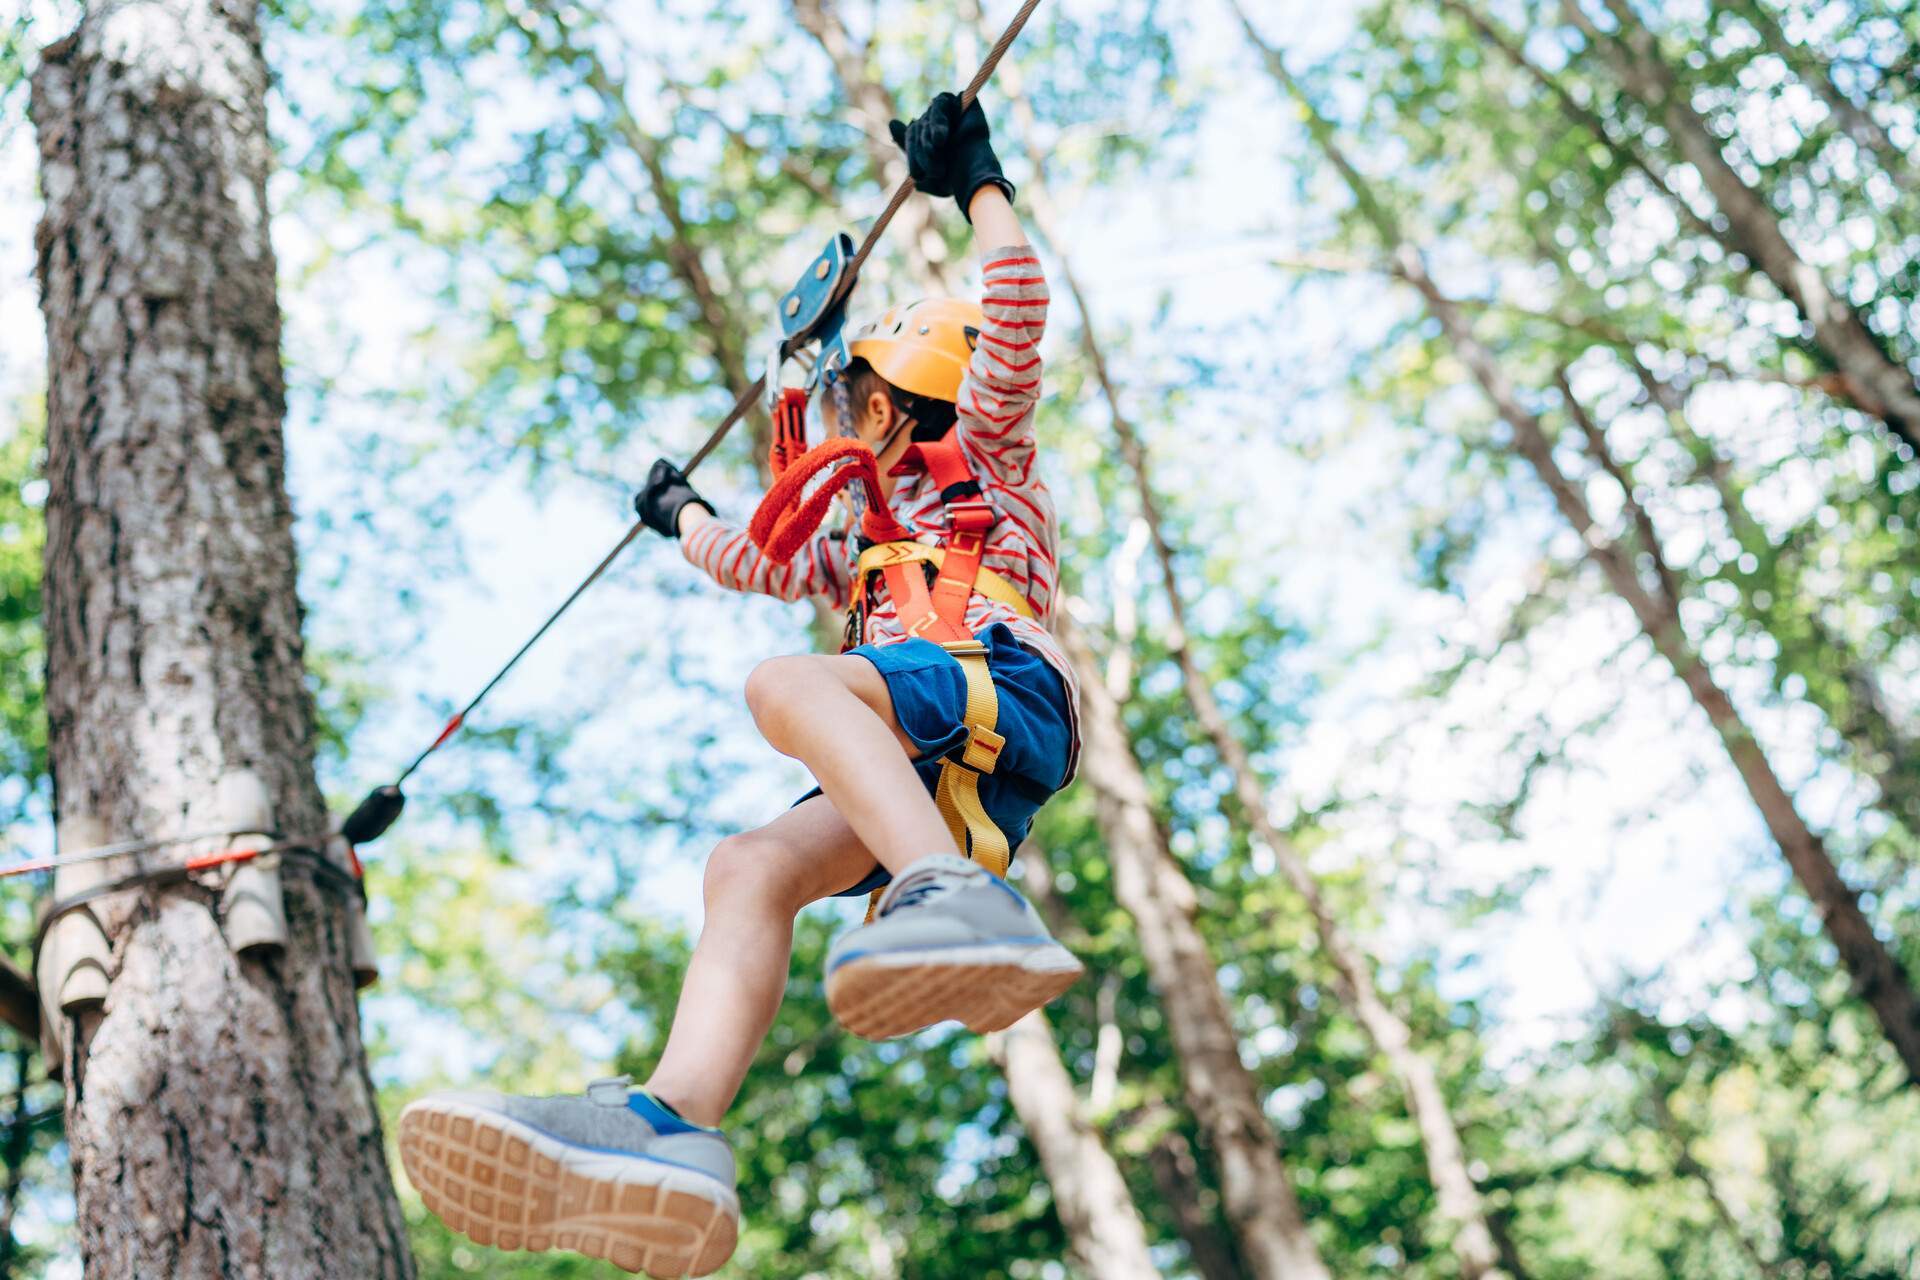 A kid hanging on the zipline holds on to the rope tight approaching a tree.